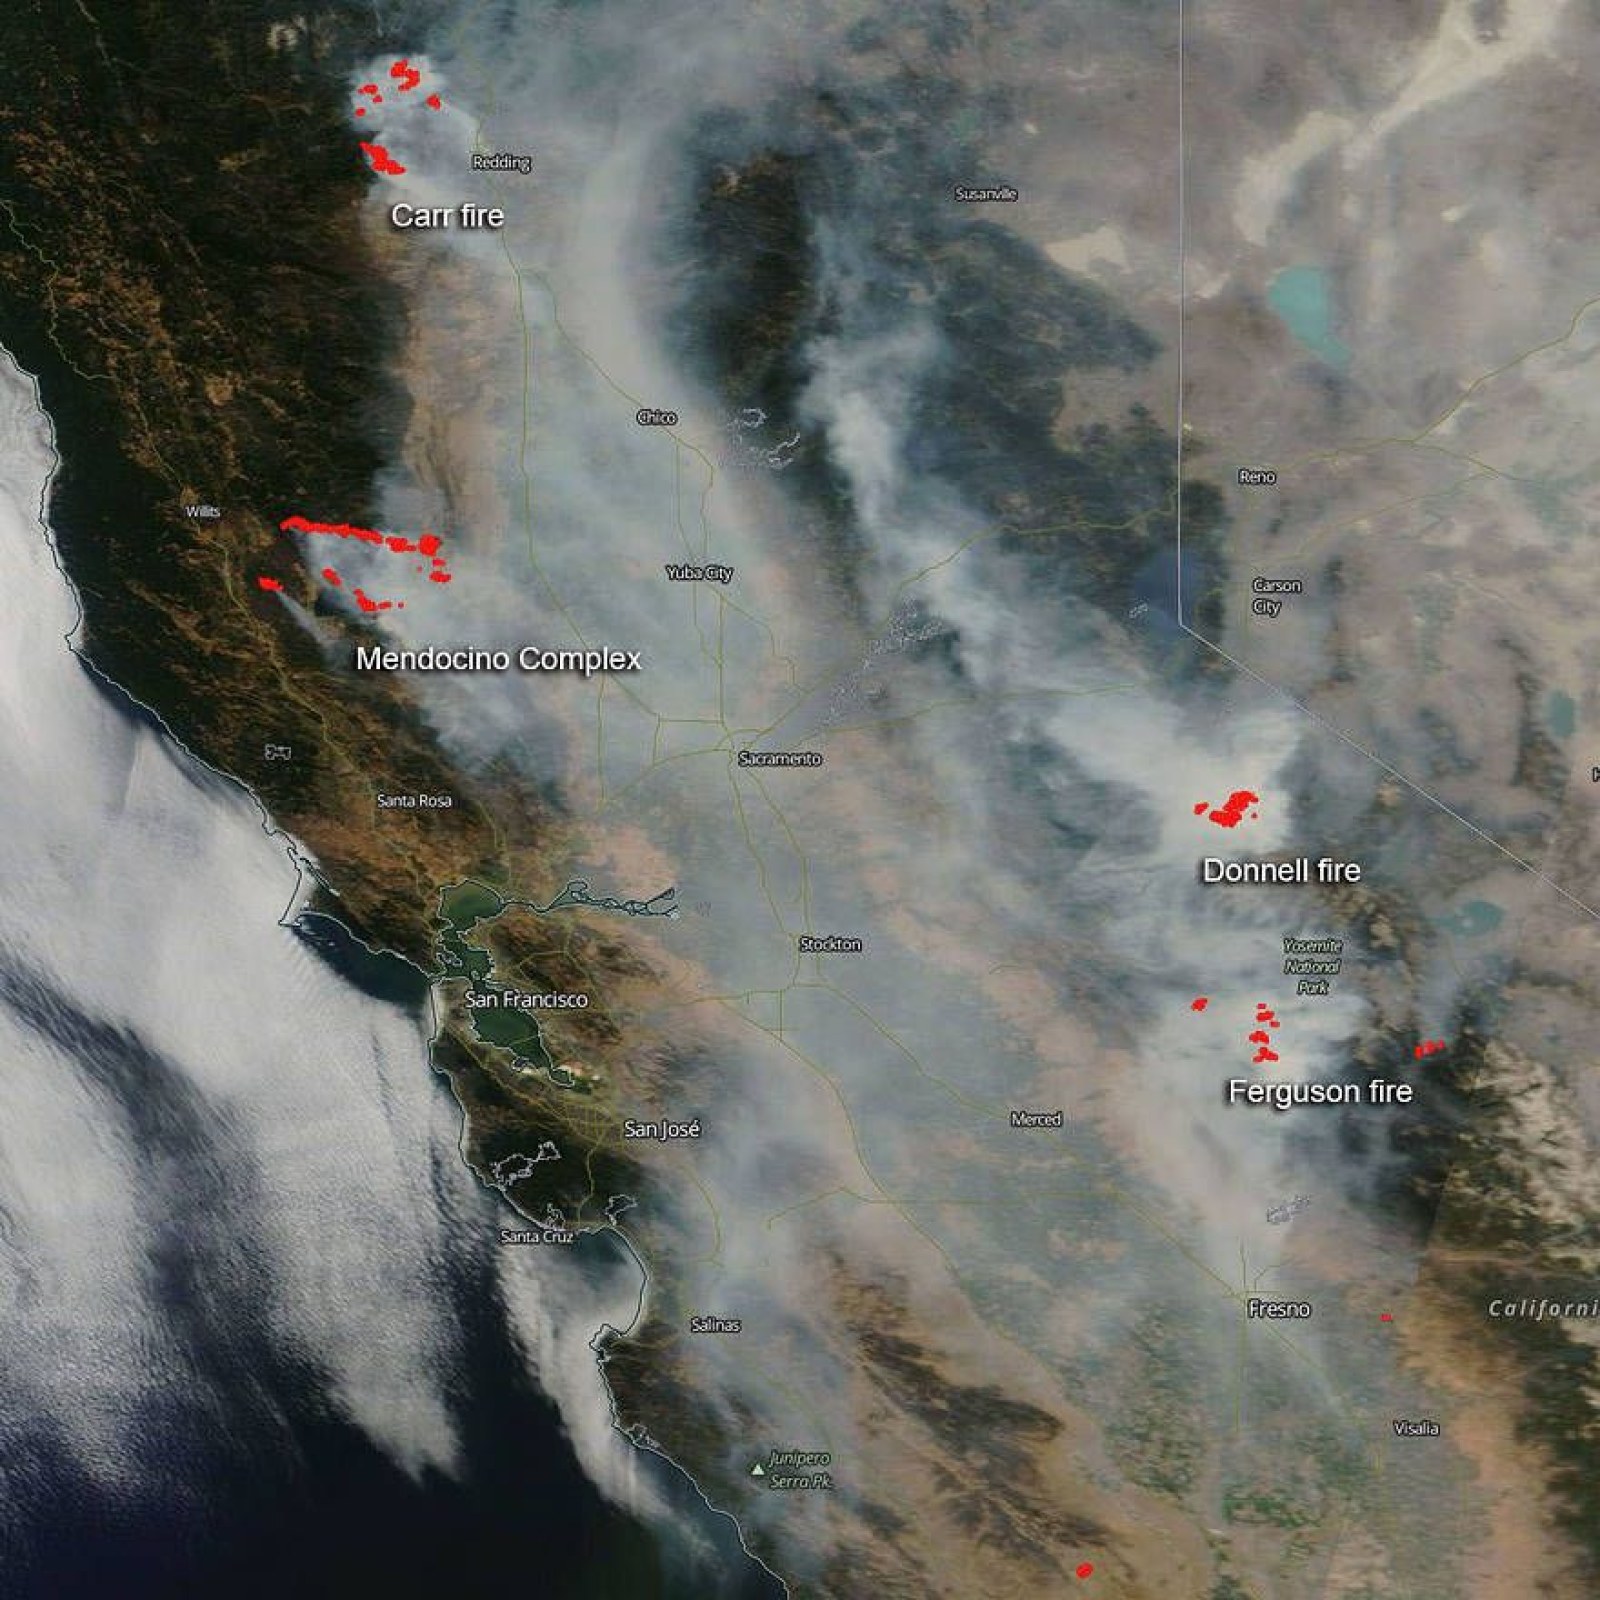 California Wildfires From Space Startling Images Show Mendocino